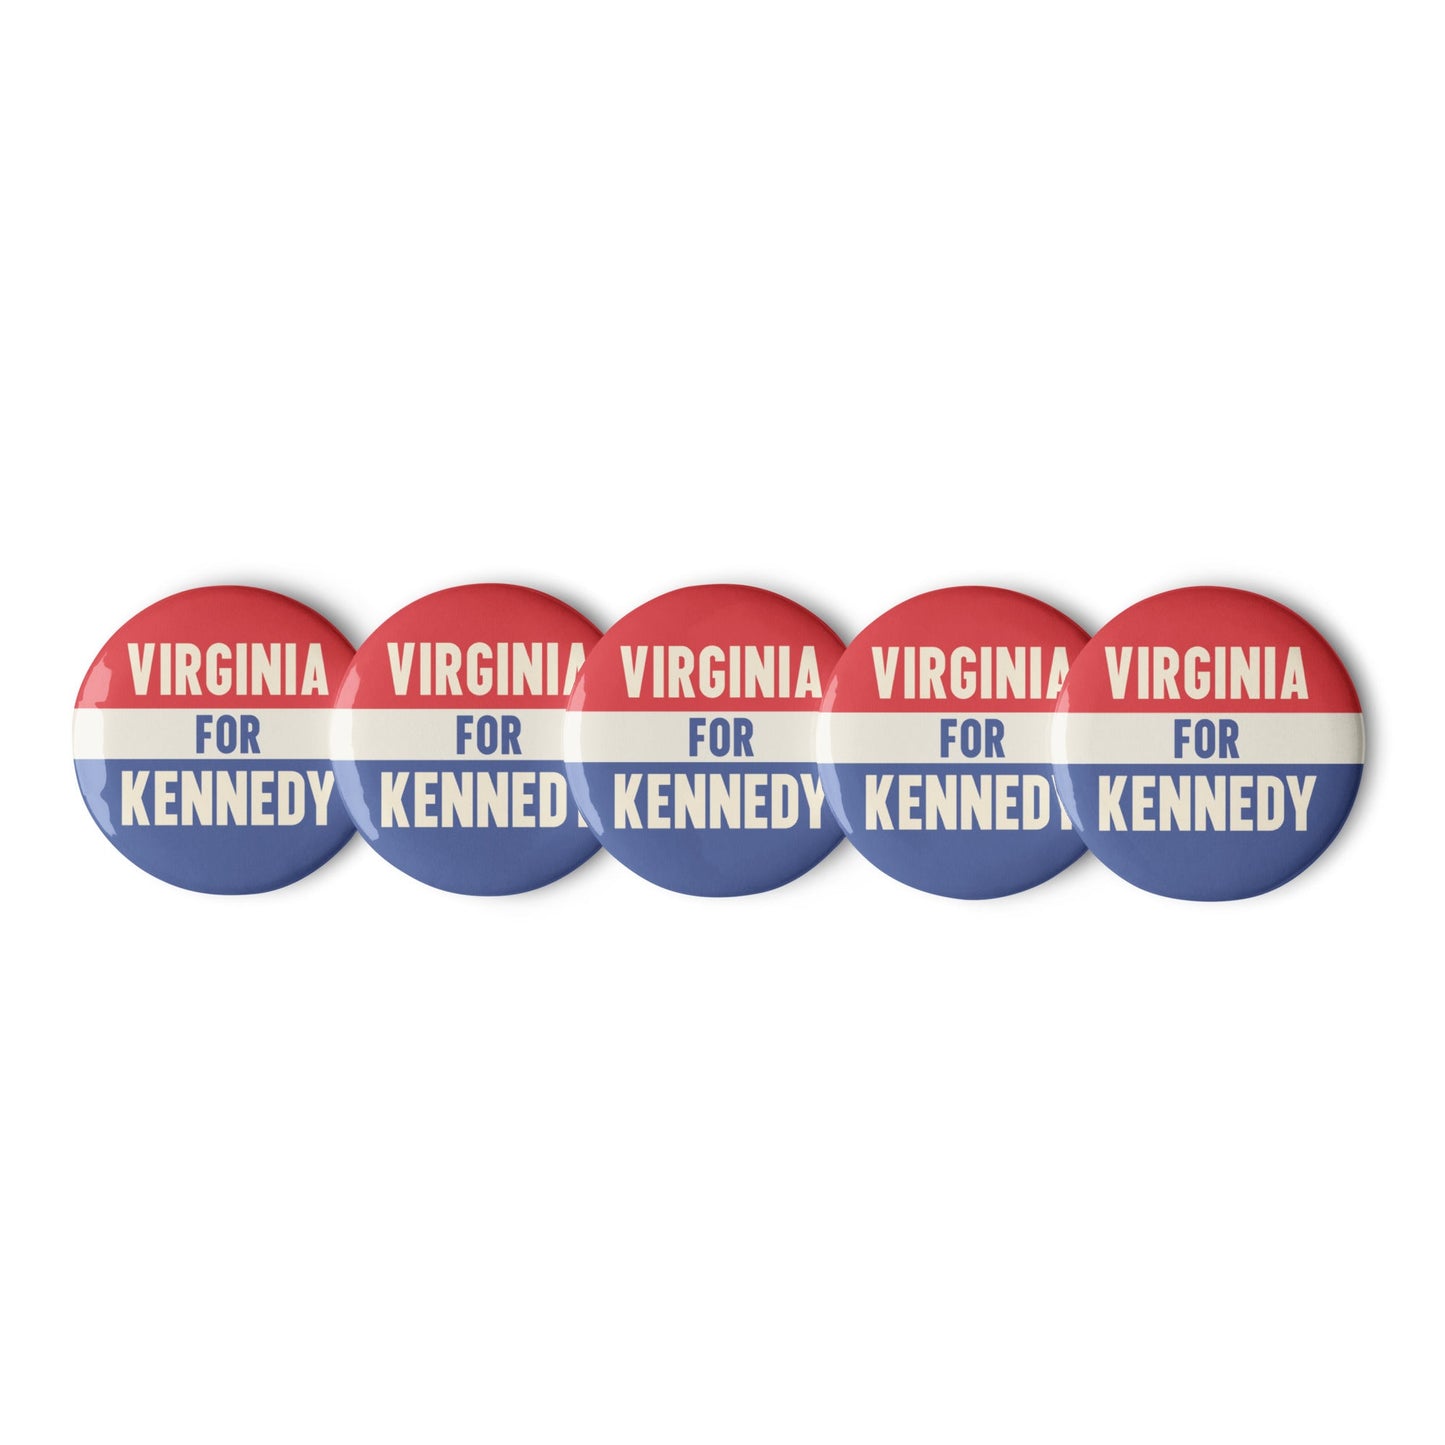 Virginia for Kennedy (5 Buttons) - TEAM KENNEDY. All rights reserved